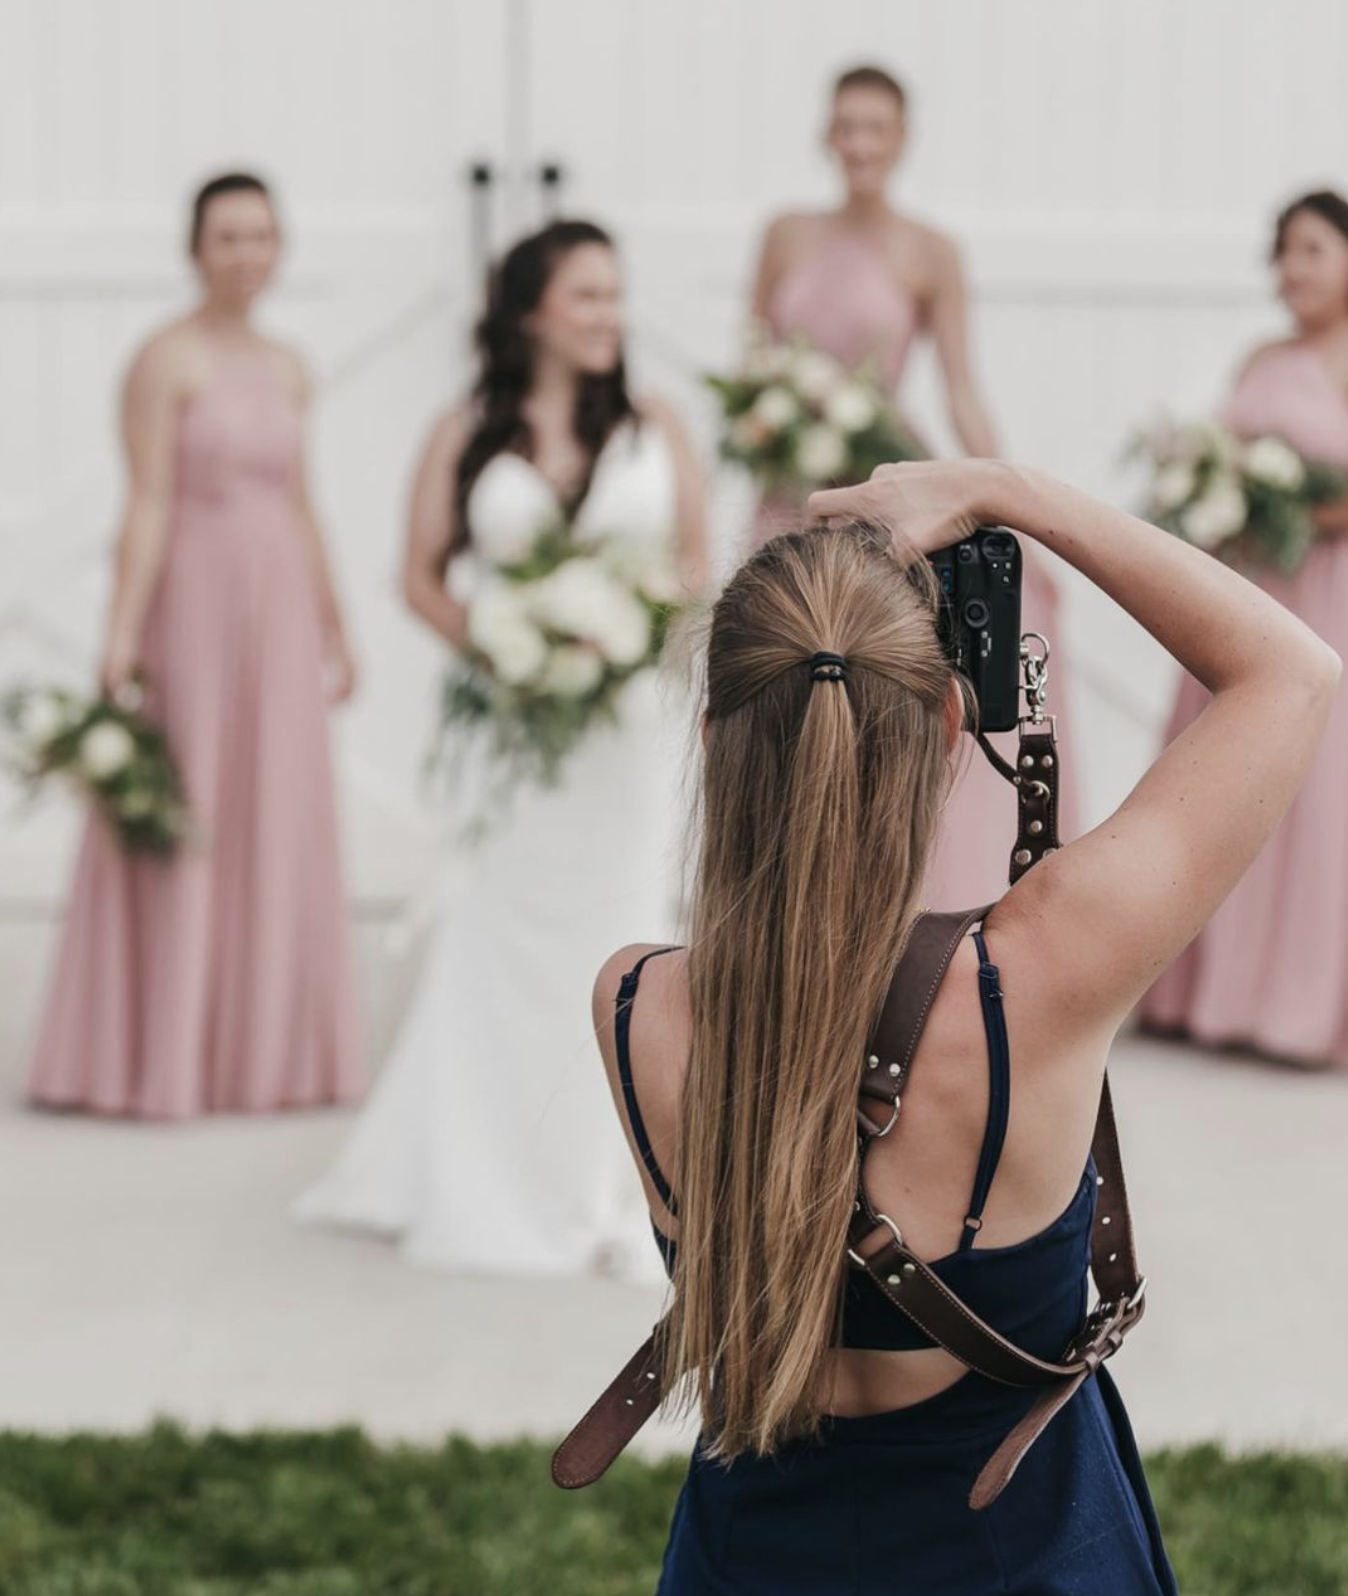 The Ultimate Wedding Vendor List (Checklist Included): Photographer getting a shot of the couple at the wedding ceremony with her back to the camera.